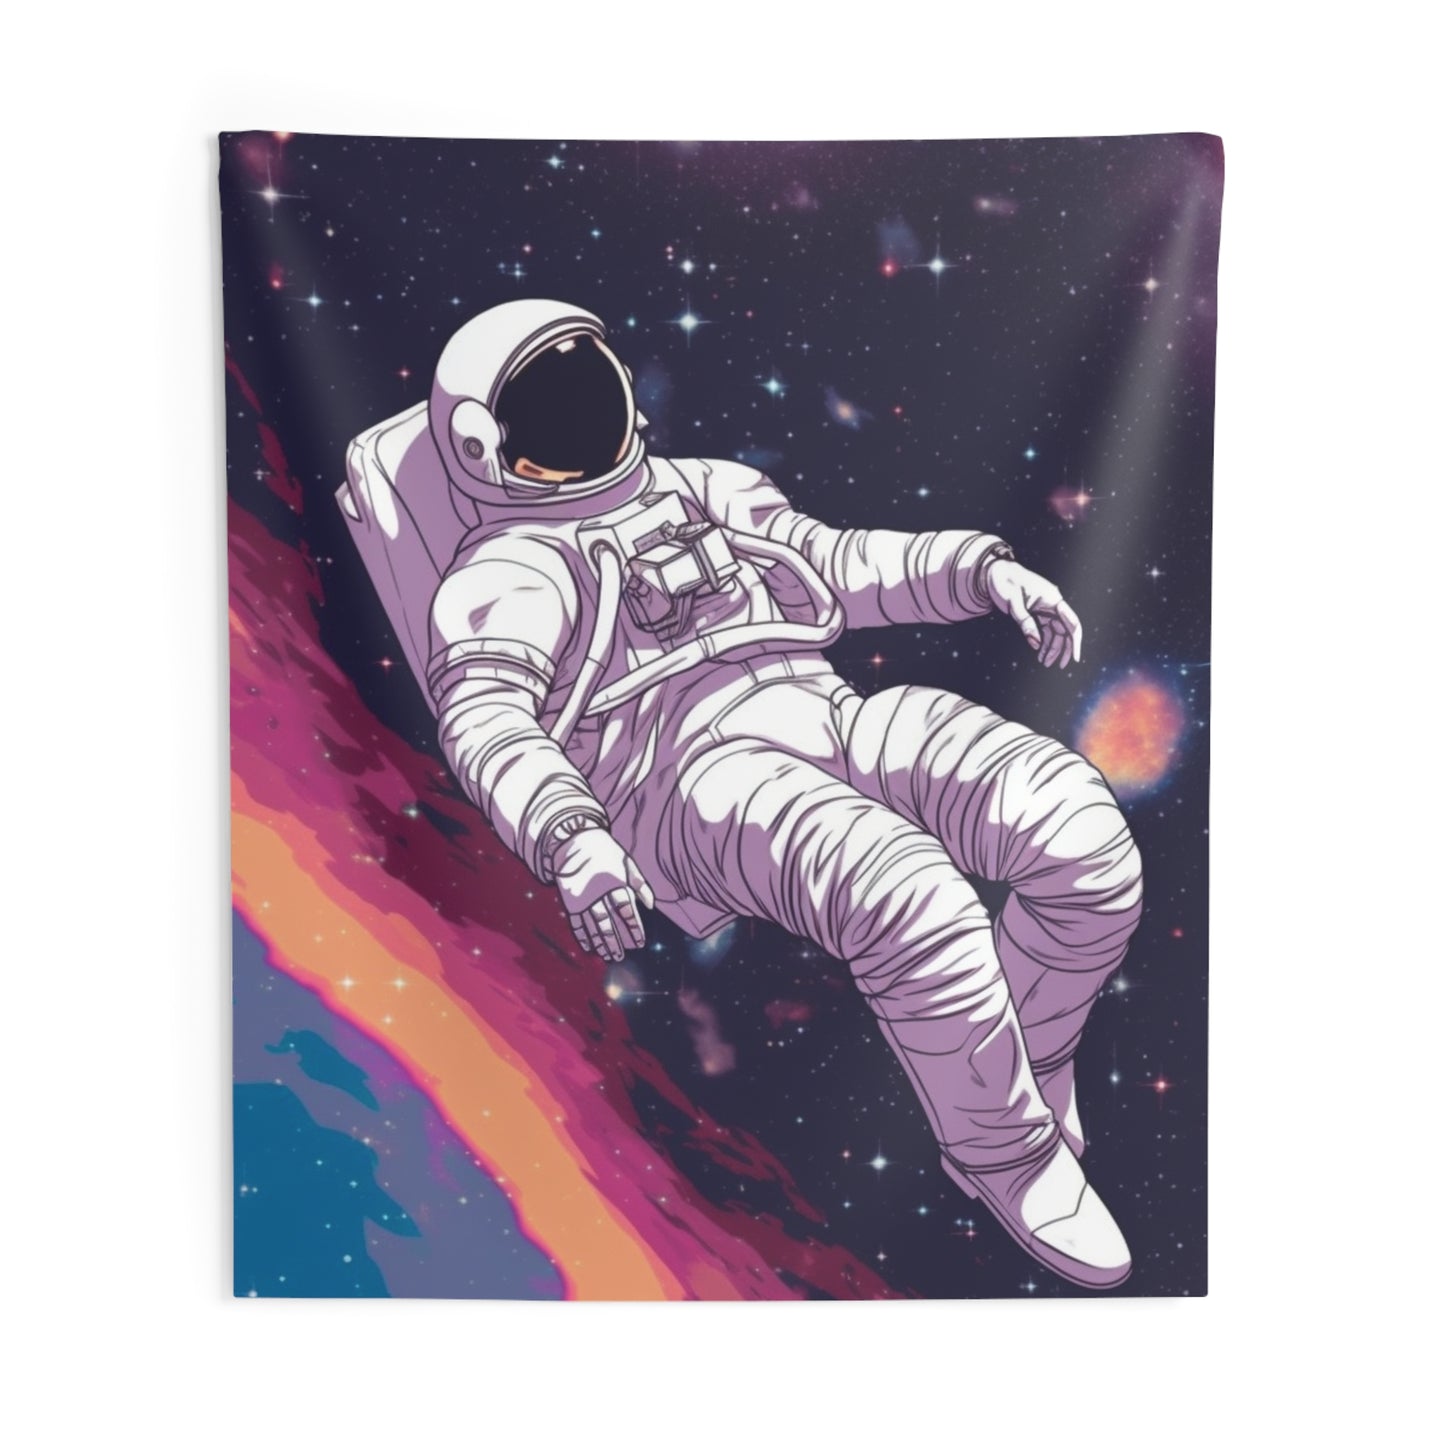 Astro Pioneer - Star-filled Galaxy Illustration - Indoor Wall Tapestries